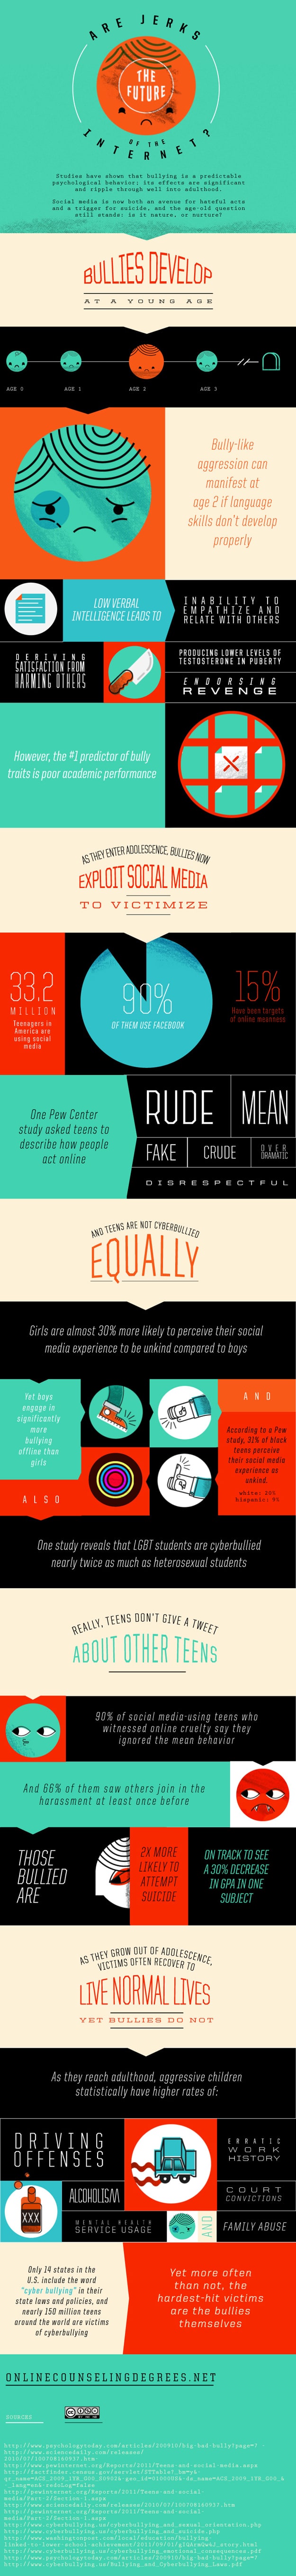 Cyberbullying: Jerks On The Internet [Infographic]